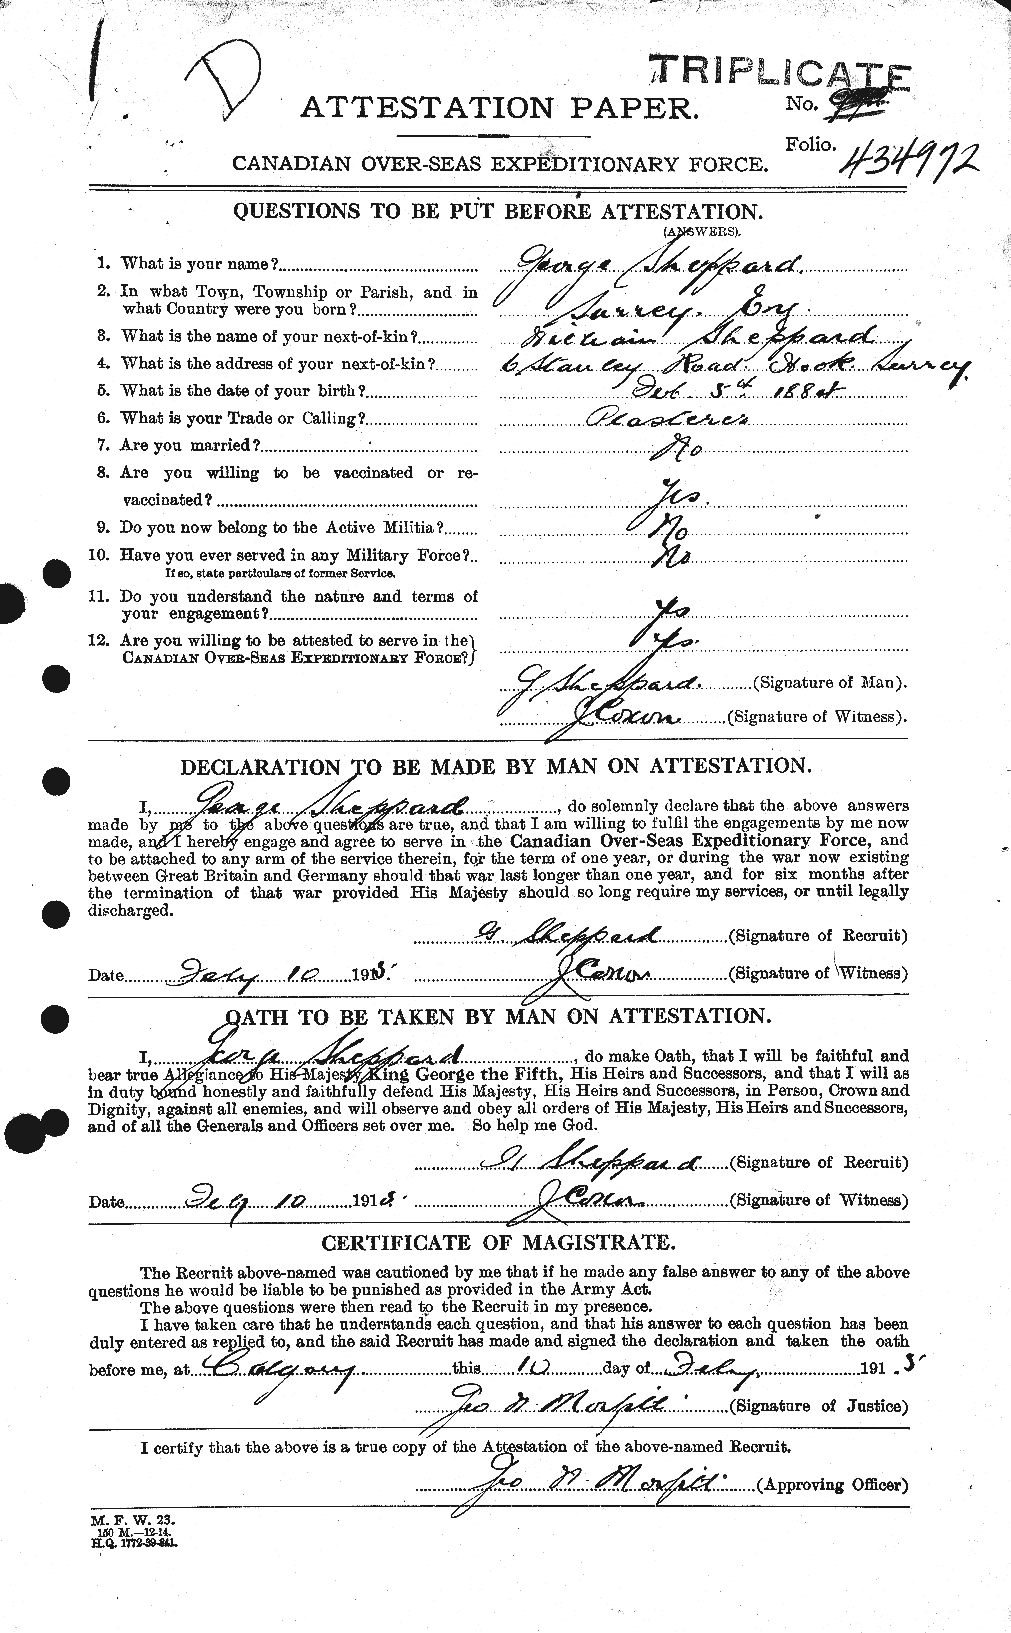 Personnel Records of the First World War - CEF 093828a